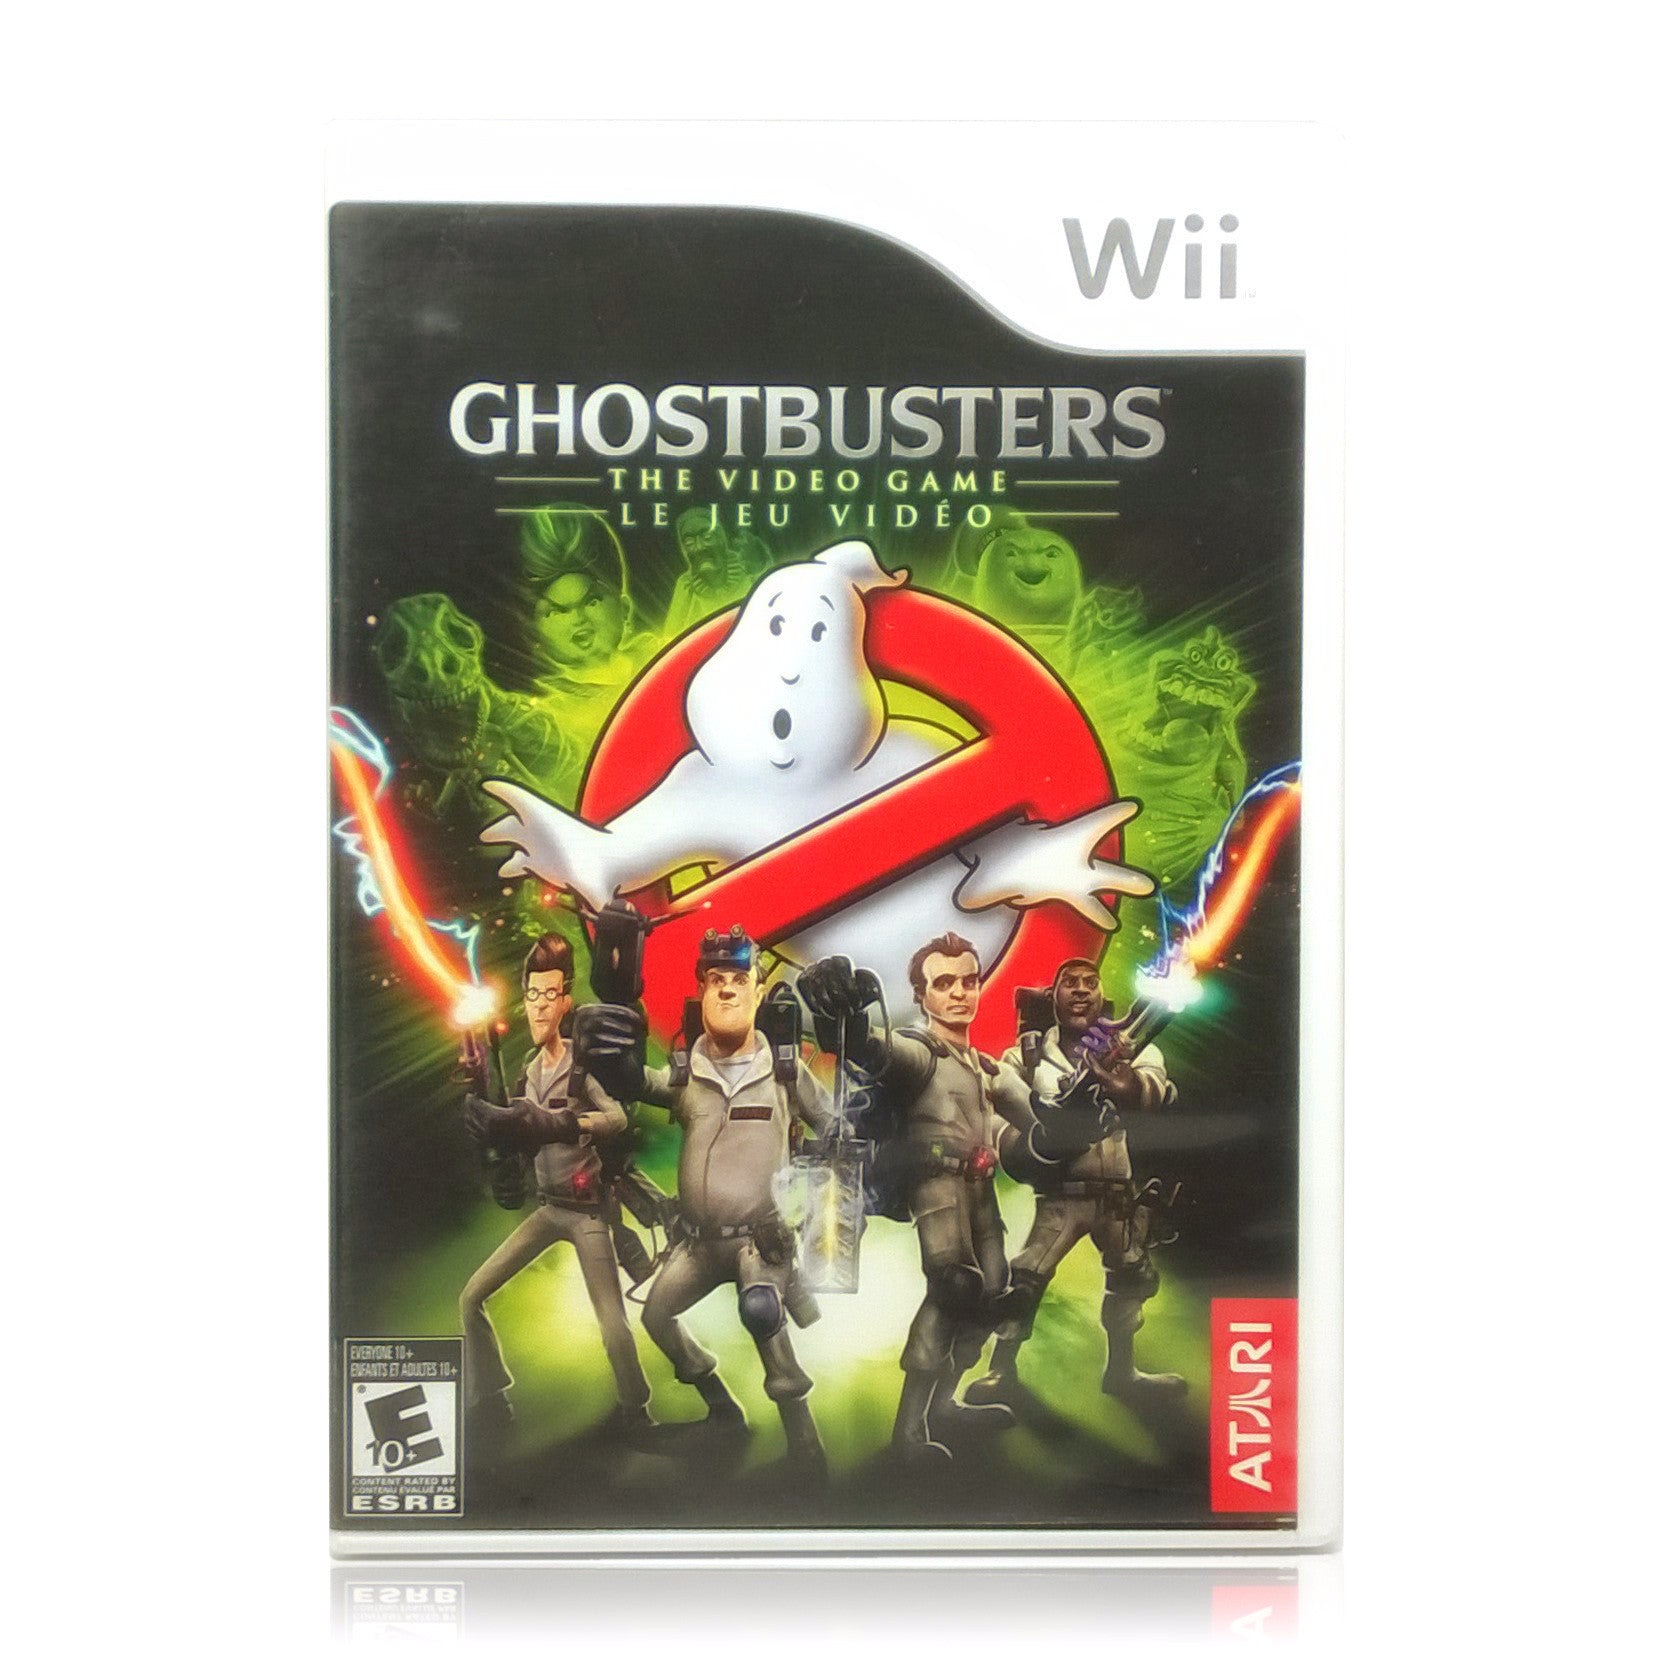 Ghostbusters: The Video Game Nintendo Wii Game - Case